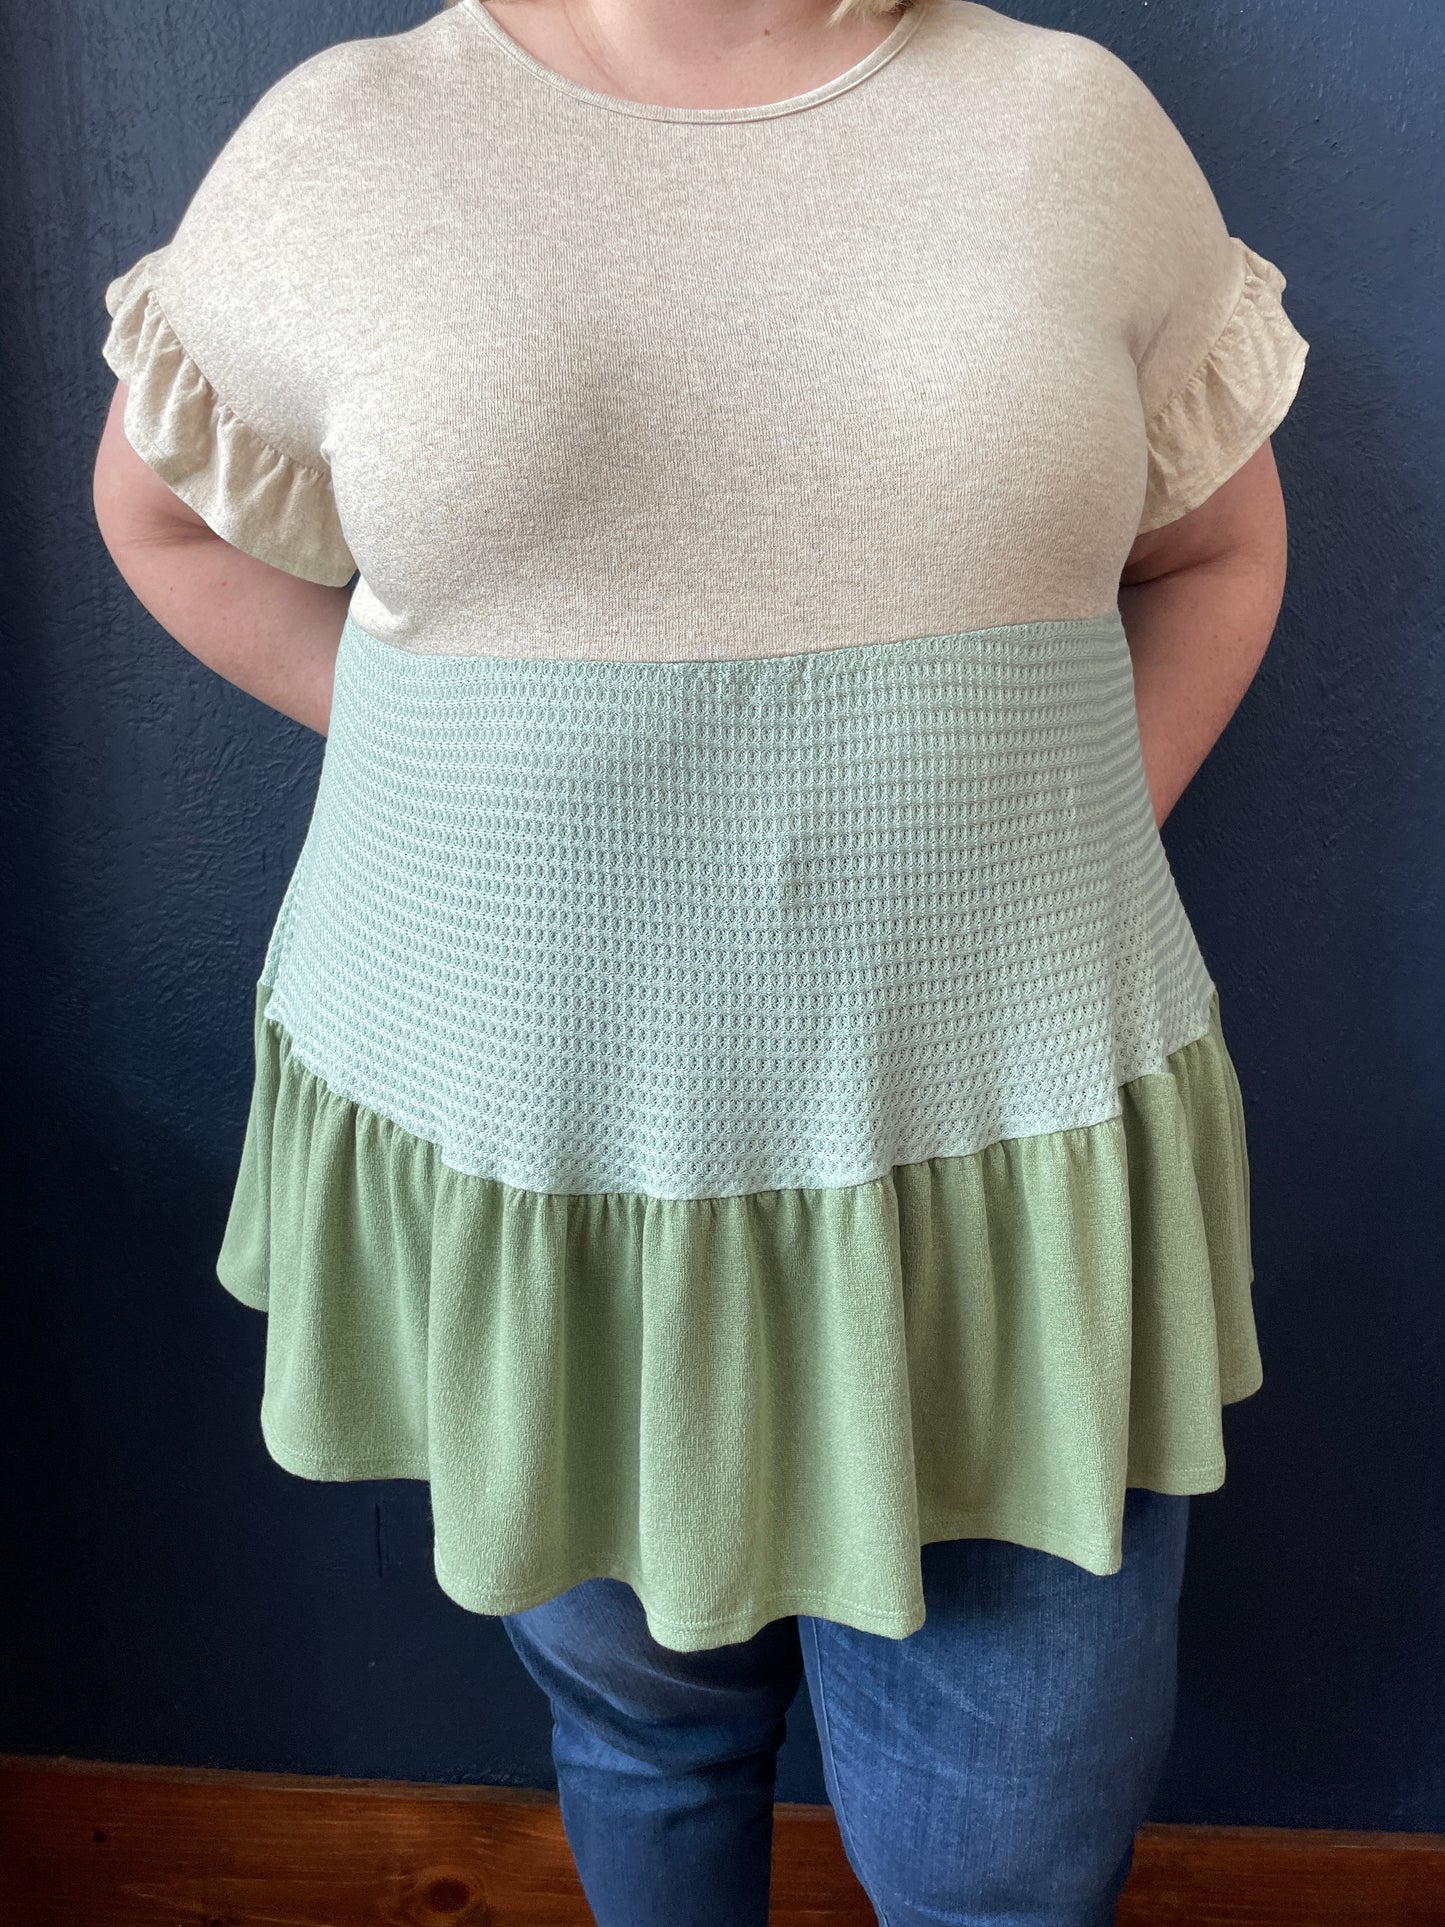 HAILEY & CO IT'S TIME TO RUFFLE TOP - SAGE/OAT